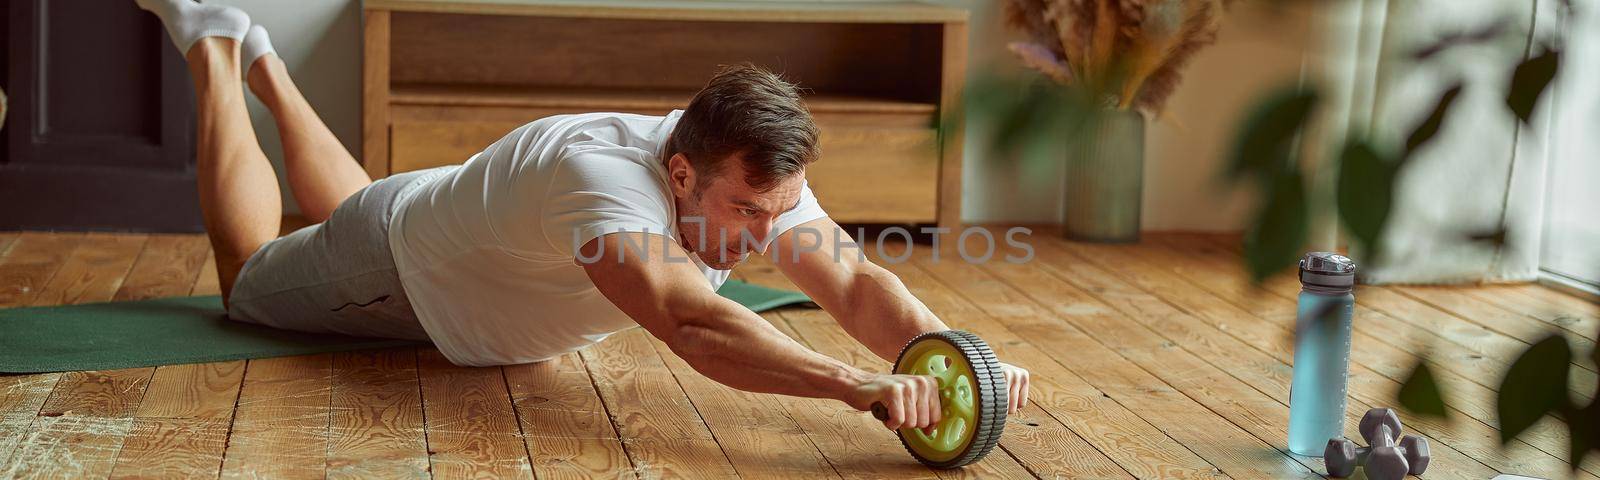 Athletic man training core with laptop at home by Yaroslav_astakhov